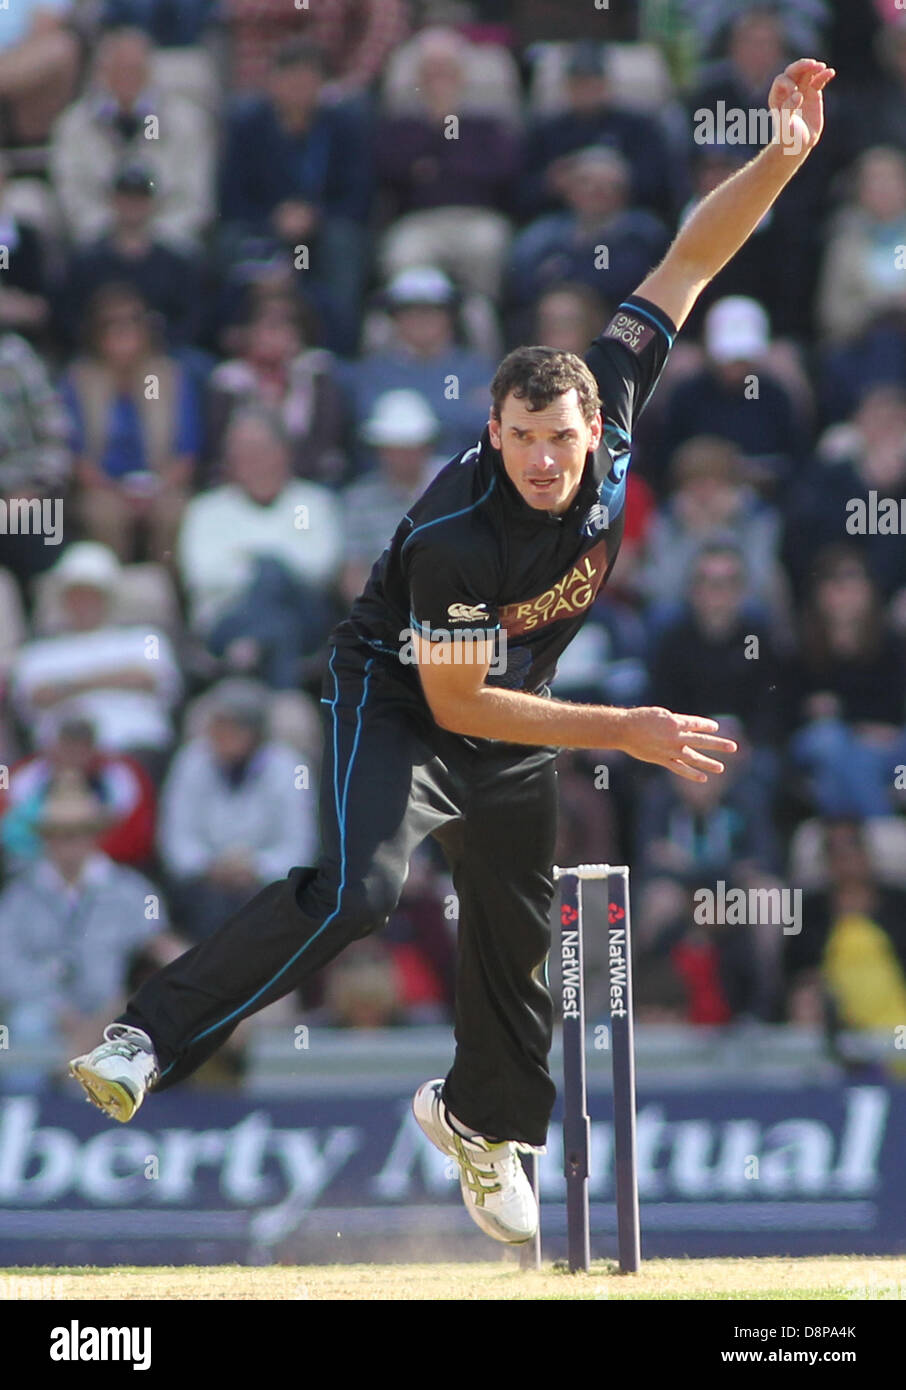 SOUTHAMPTON, ENGLAND - June 02: New Zealand's Kyle Mills bowling during the 2nd Nat West one day international cricket match between England and New Zealand at Lords Cricket Ground on June 02, 2013 in London, England, (Photo by Mitchell Gunn/ESPA) Stock Photo